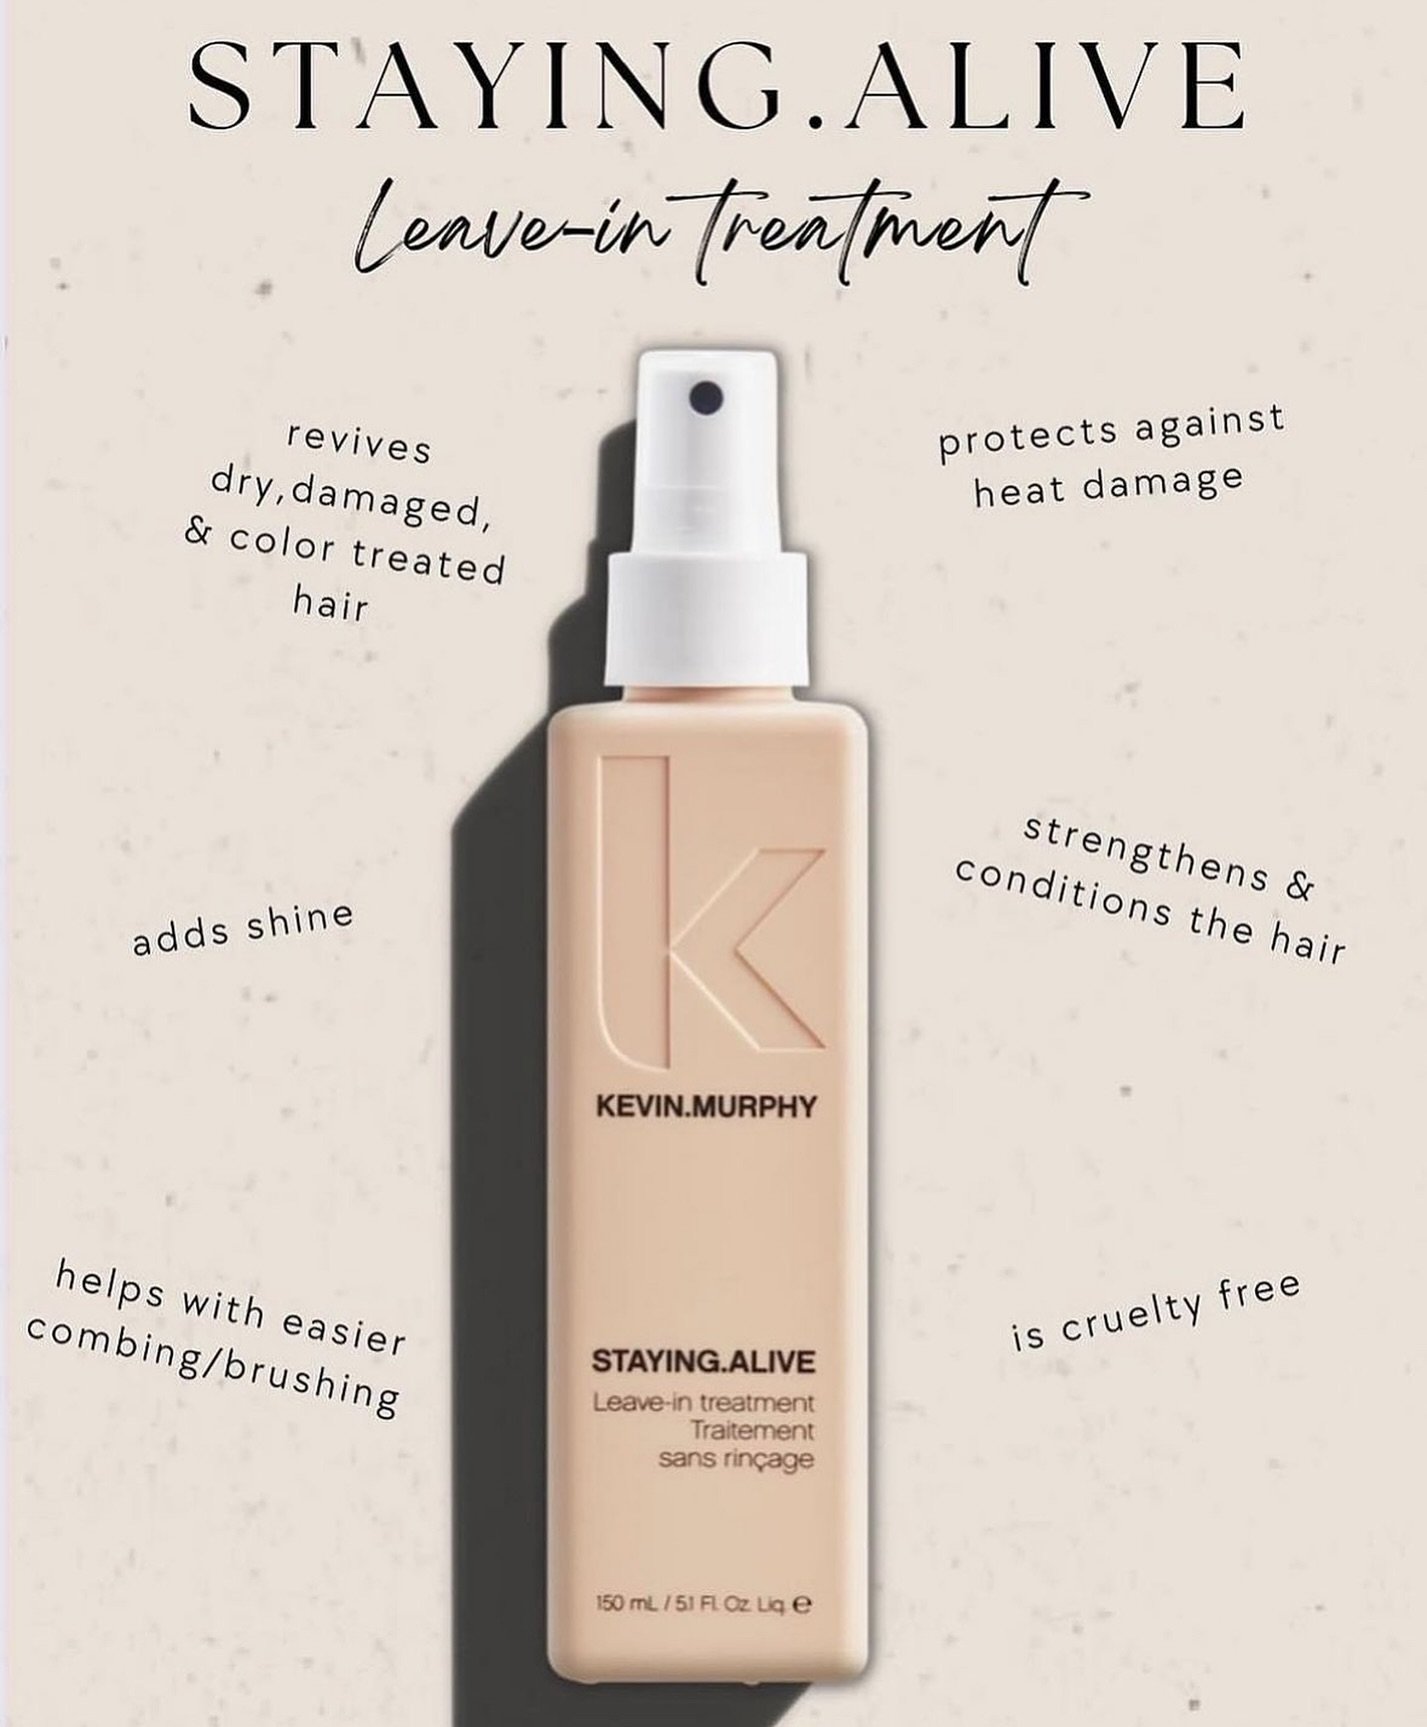 What&rsquo;s not to love? 

STAYING.ALIVE. 

#kevinmurphy #kevinmurphyproducts #kevinmurphyhair #hairstylist #michigan #michiganstylist #colorist #haircolorist #coloredhairgoals #hairgoals #healthyhair